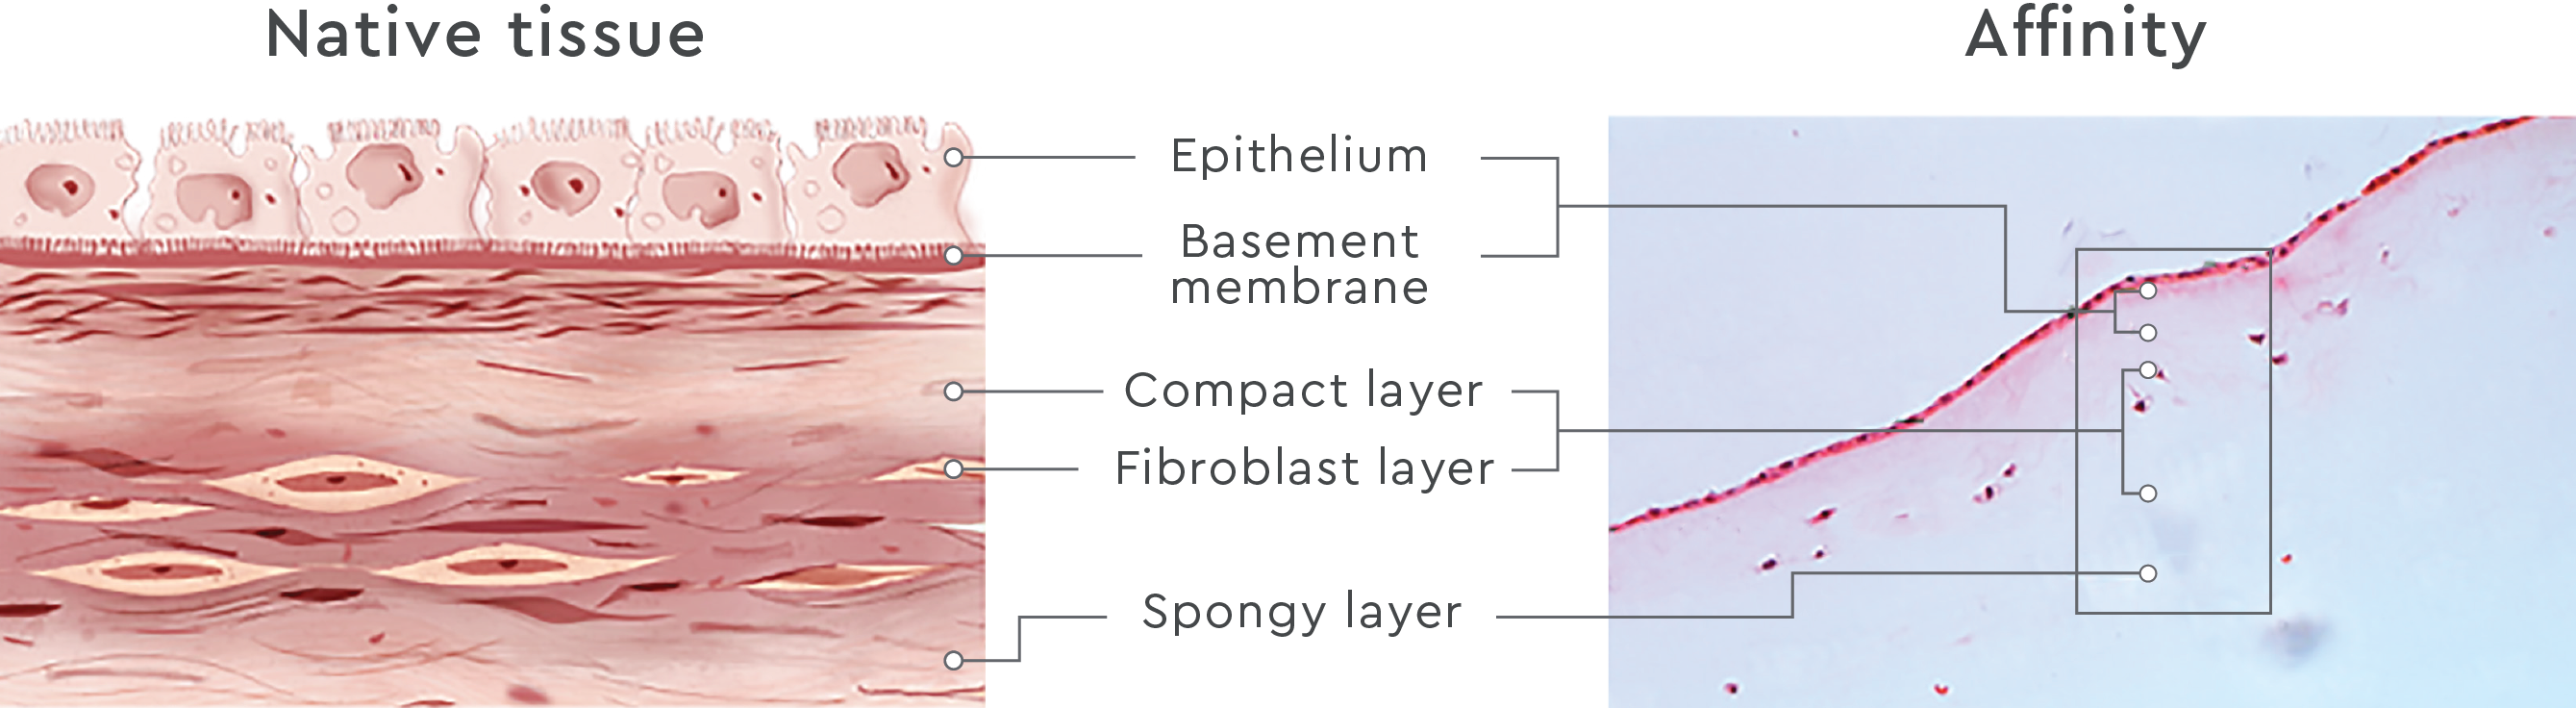 The epithelium, basement membrane, compact layer, fibroblast layer, and spongy layer in Affinity